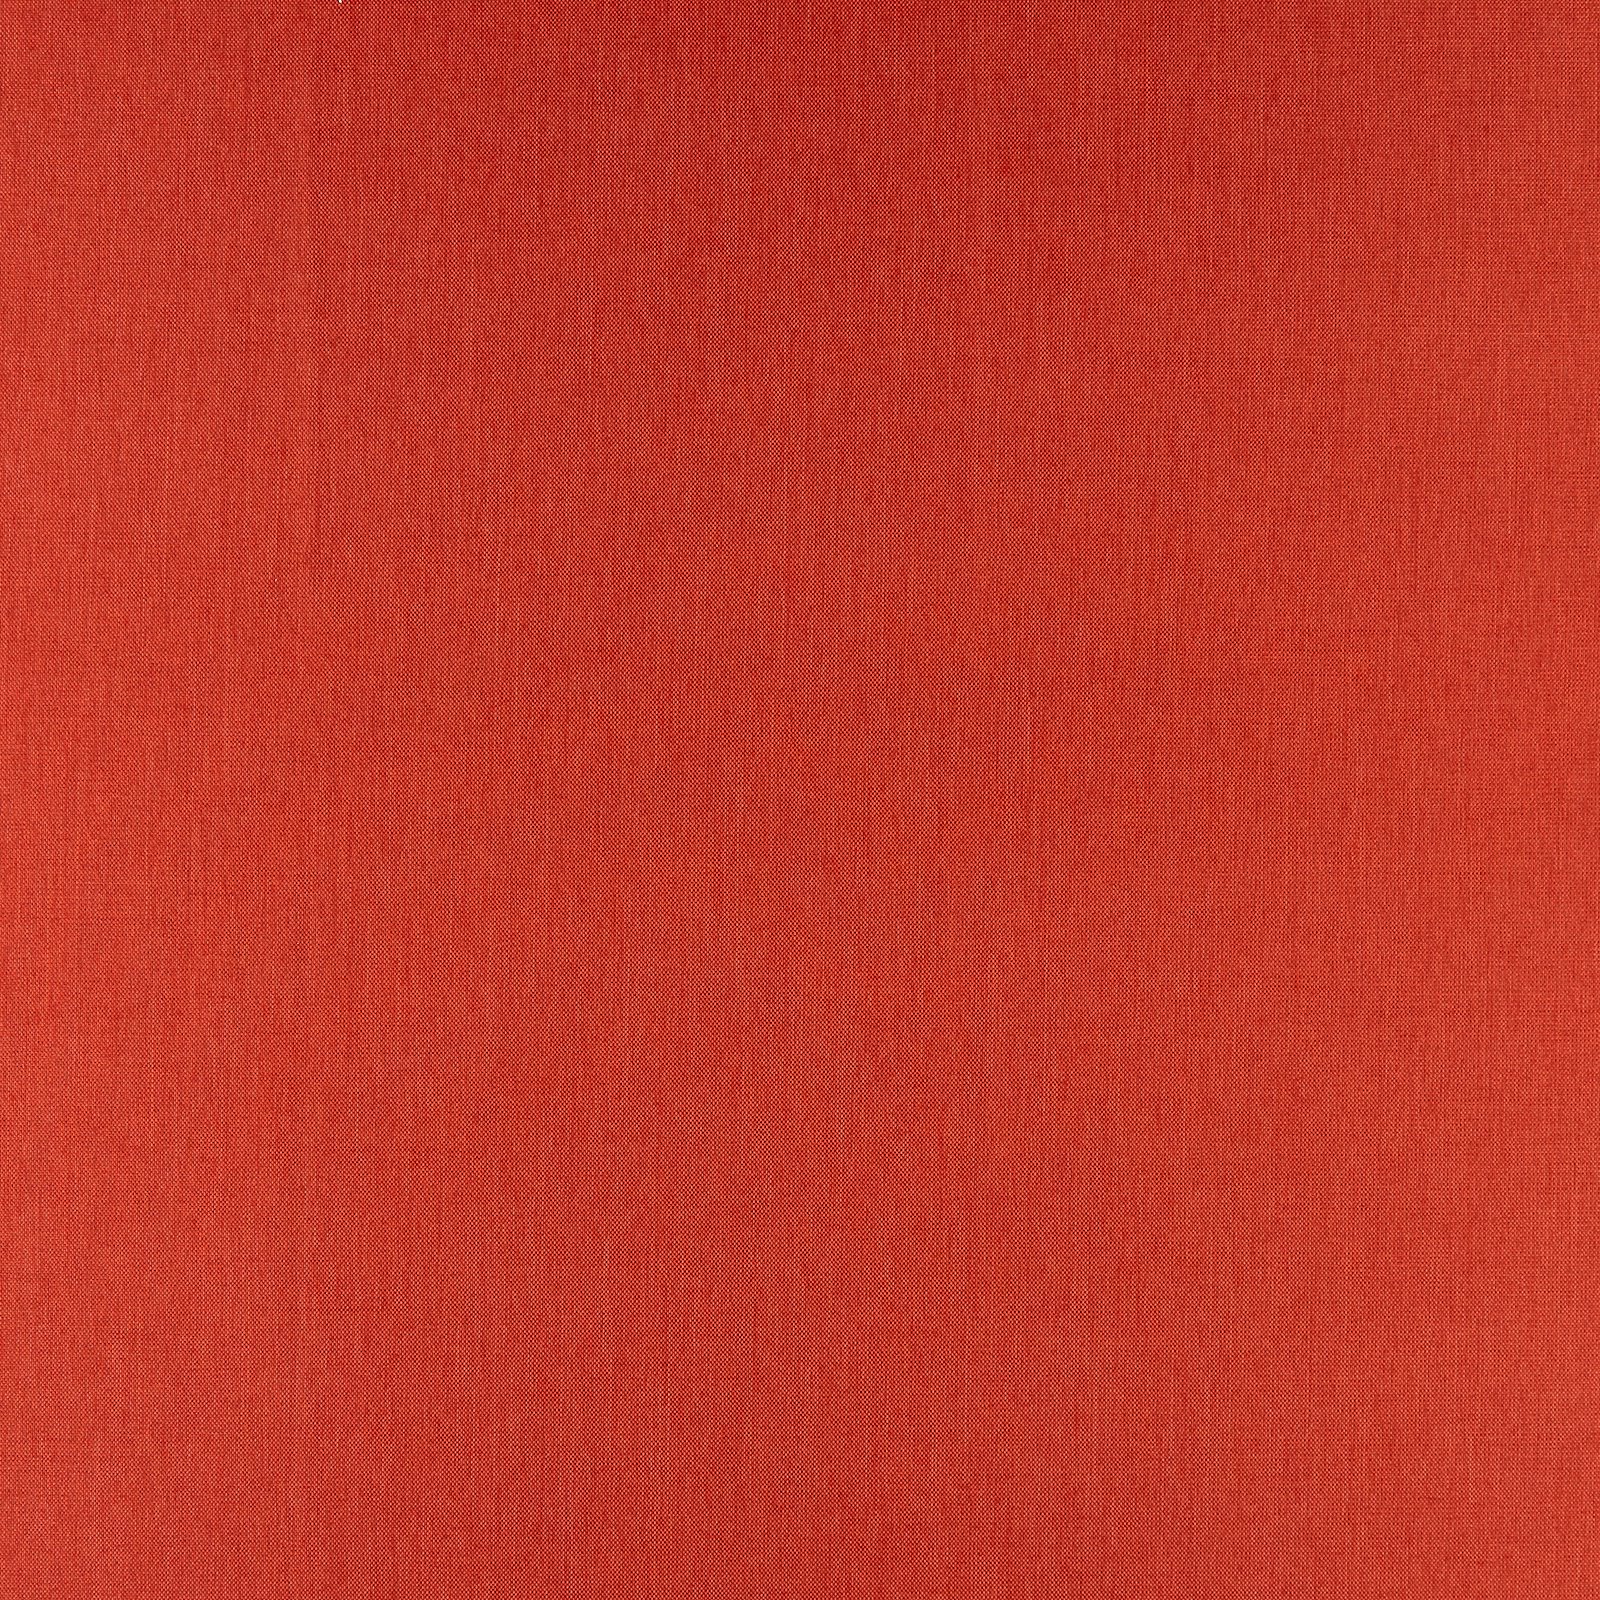 Upholstery fabric warm light red melange 826584_pack_solid